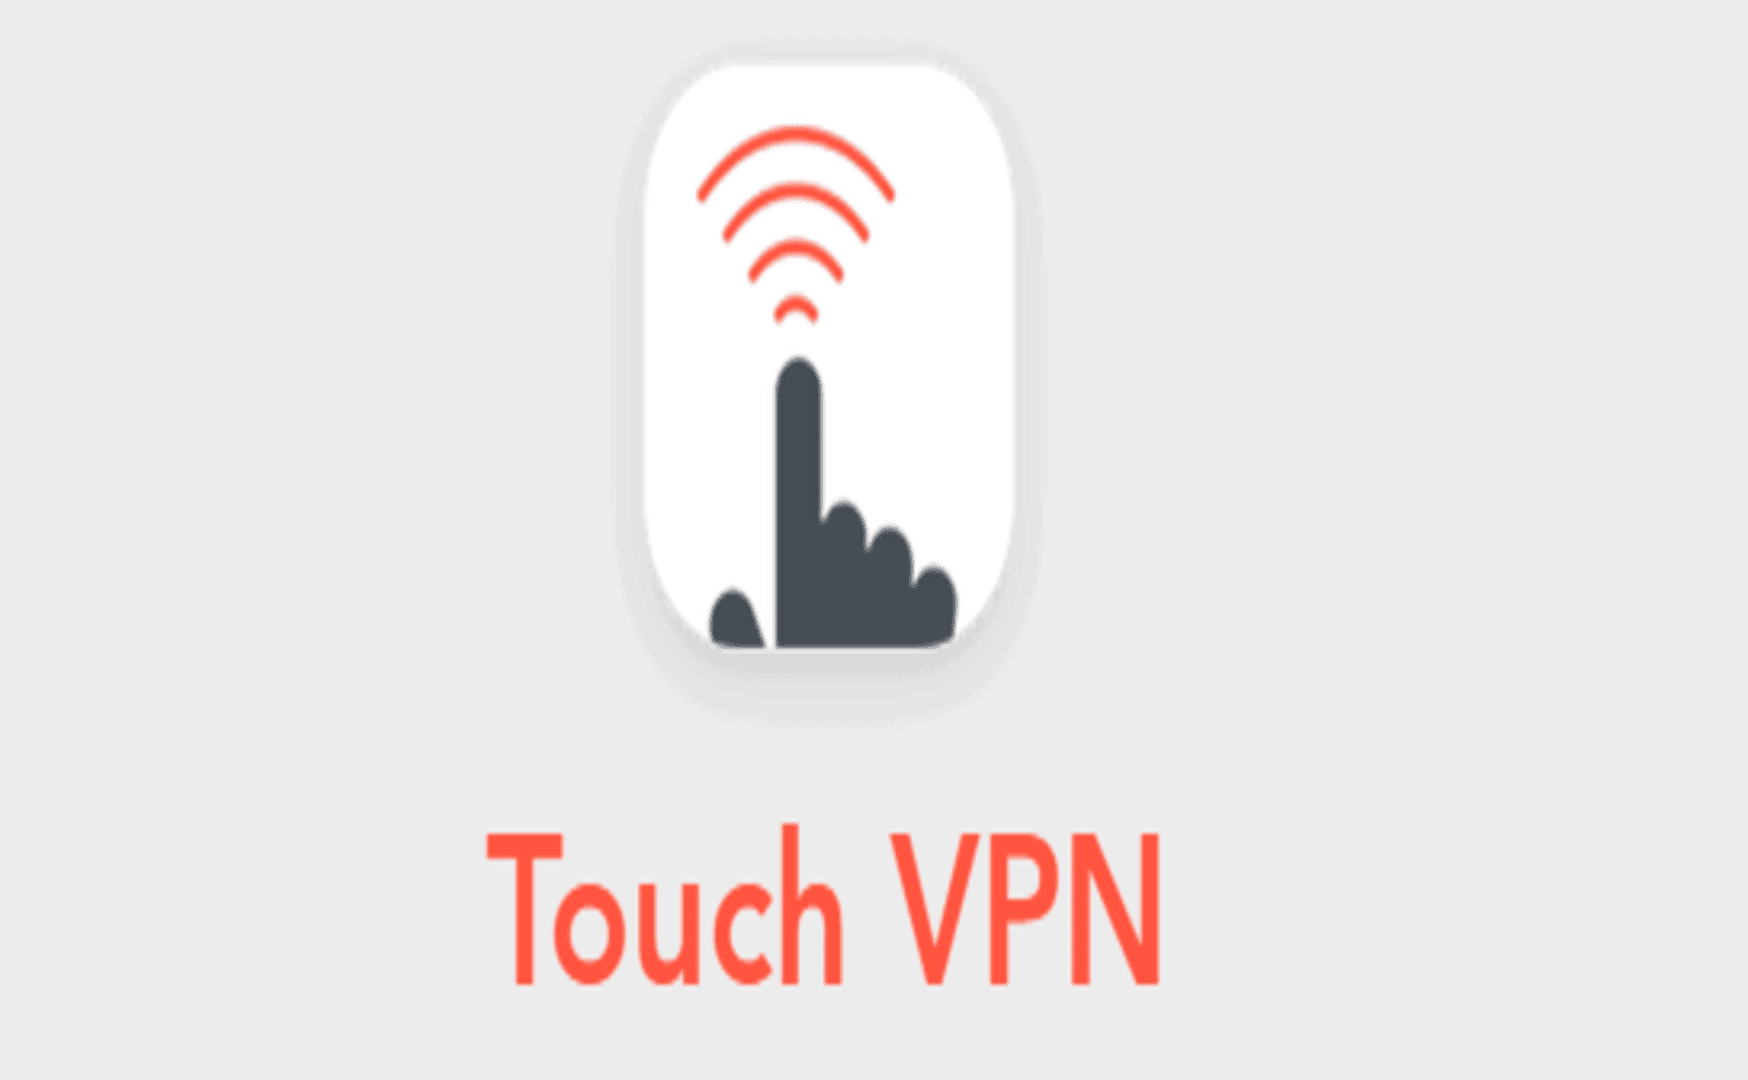 Top free VPNs for Nigerians